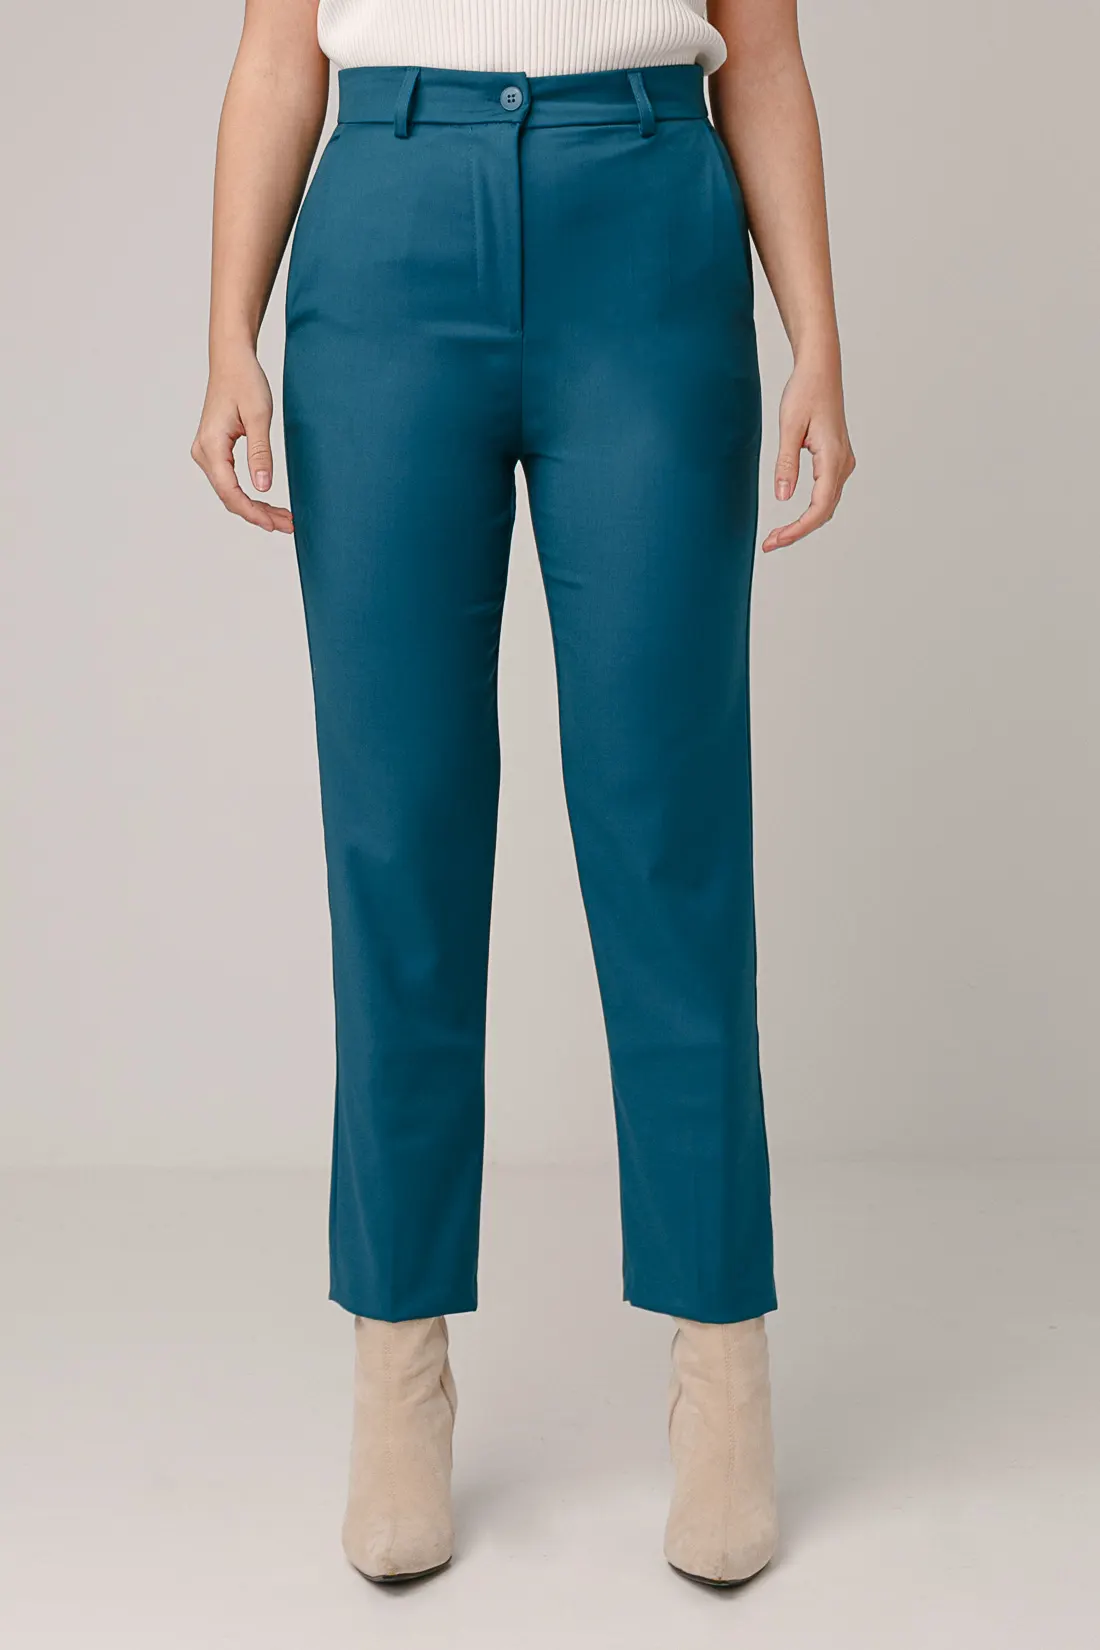 BROOCH TROUSERS - TURQUOISE